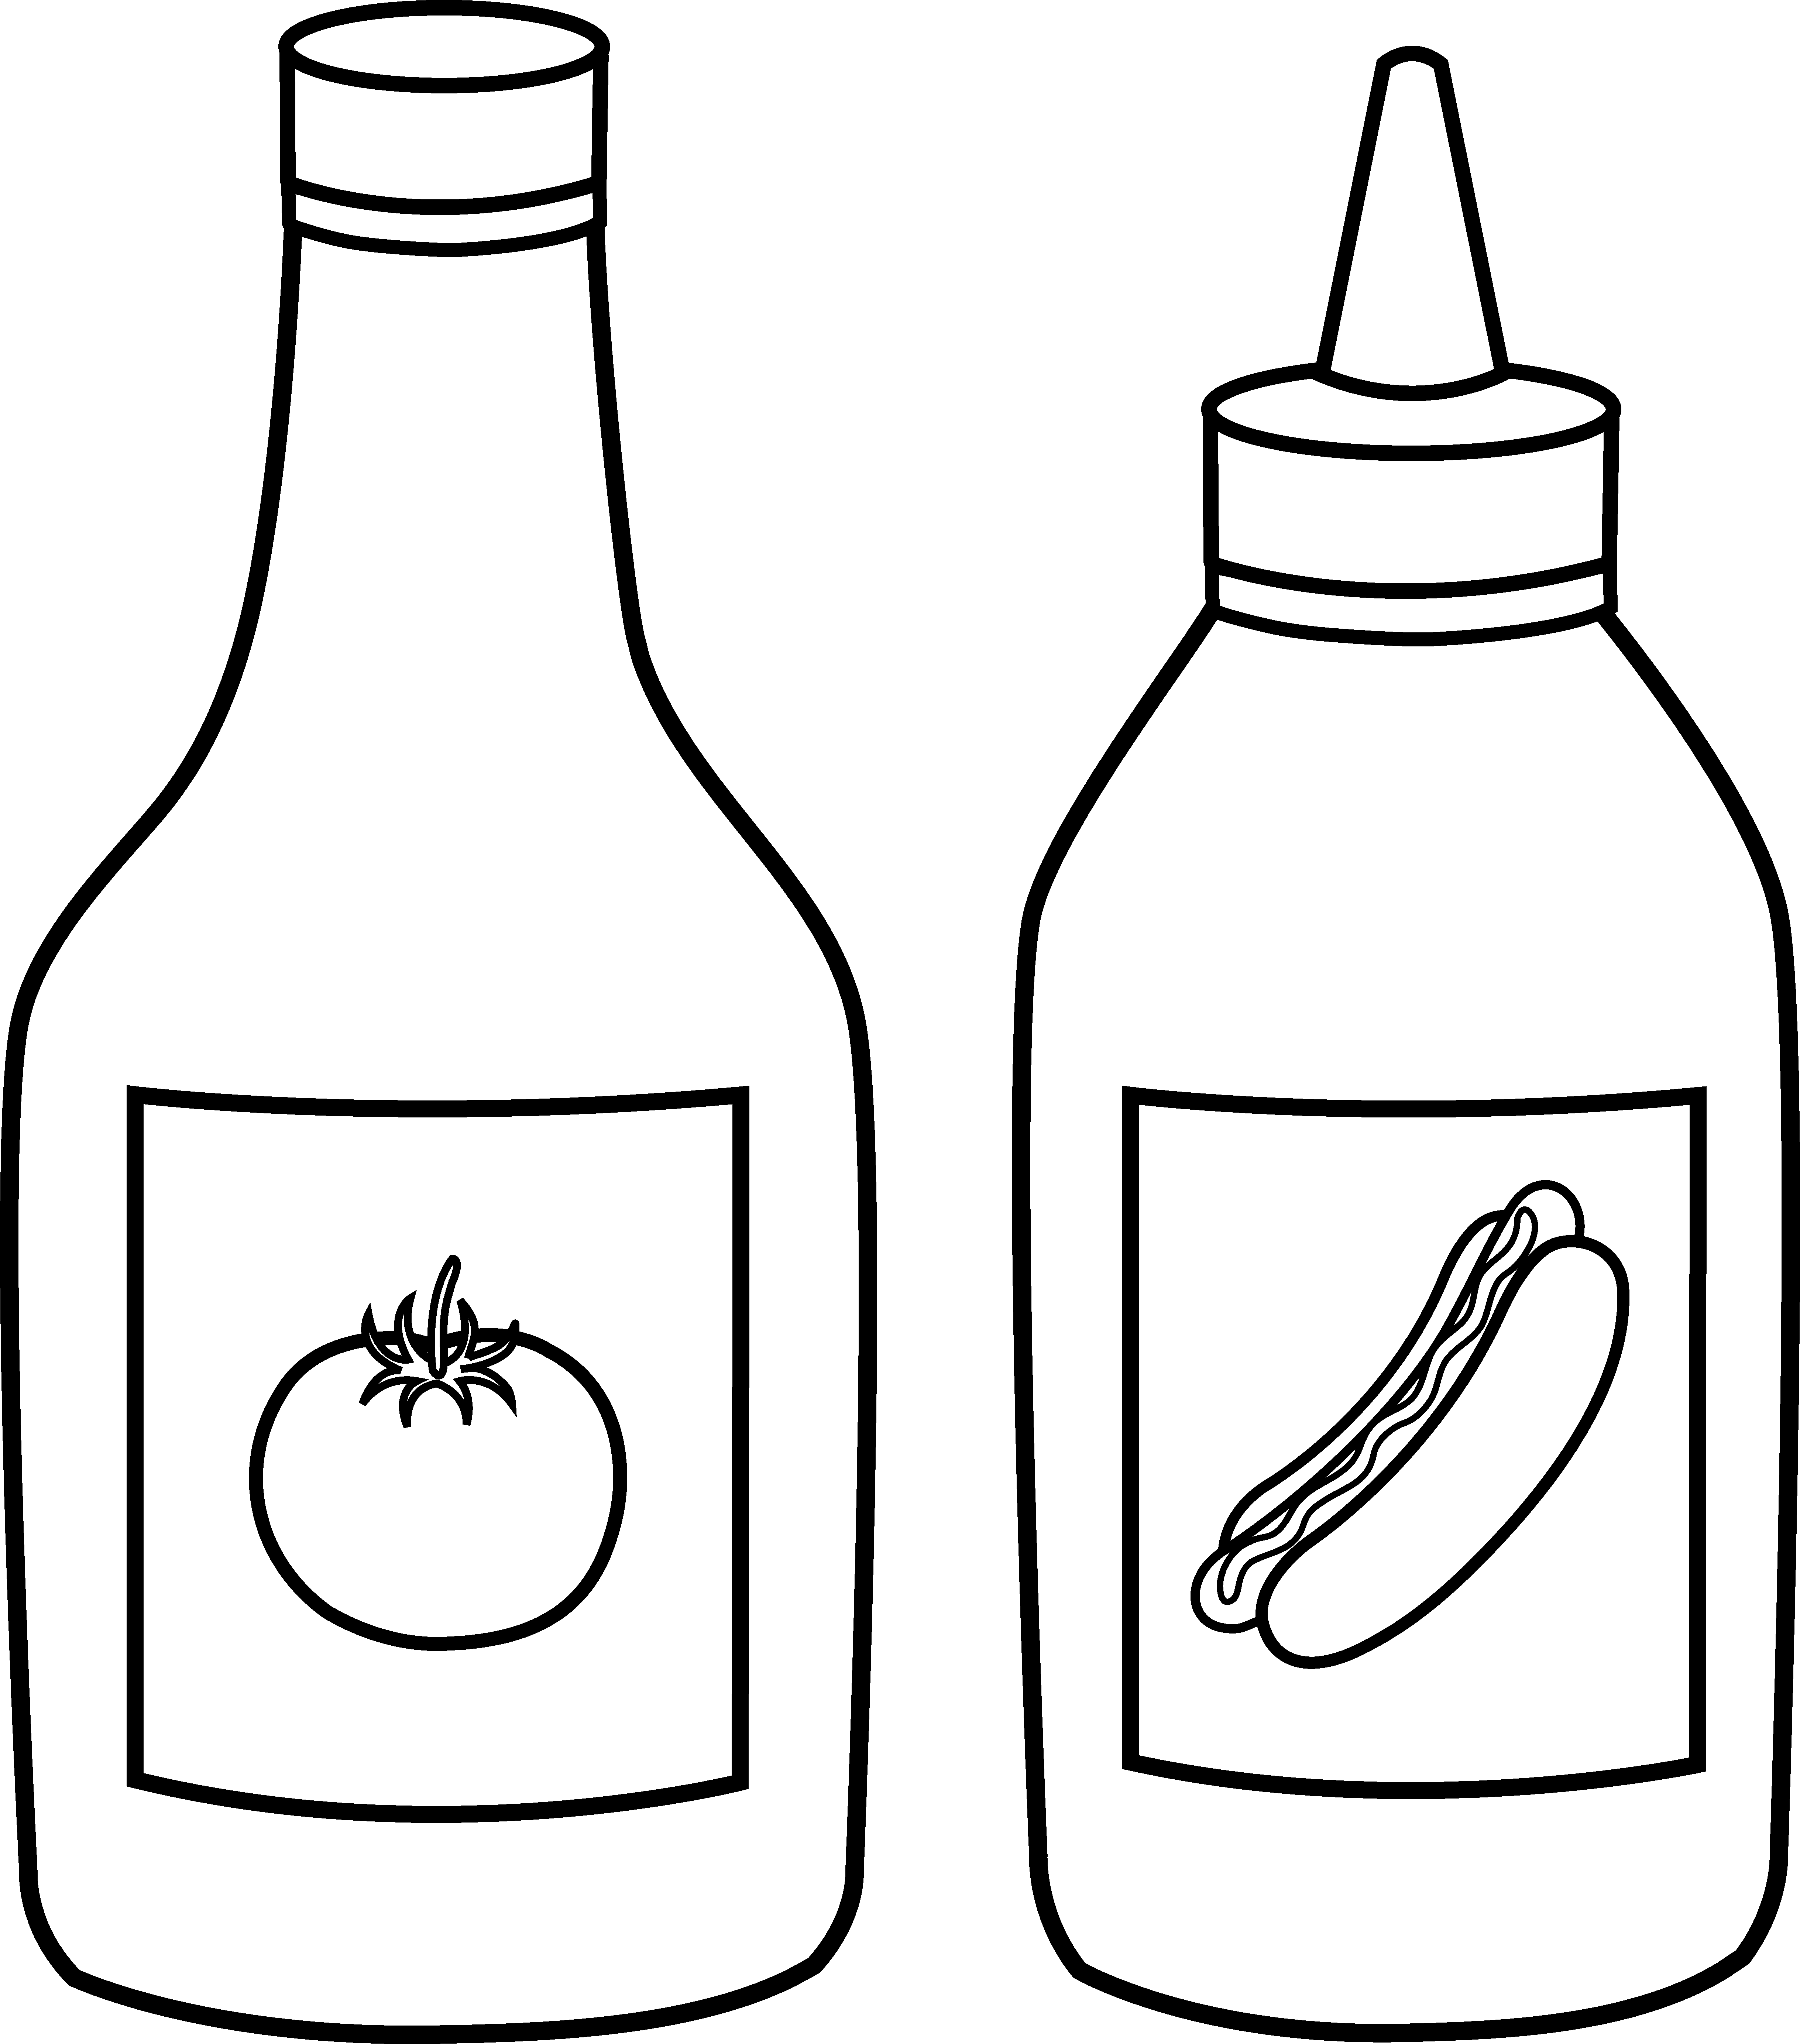 Ketchup clipart black and white